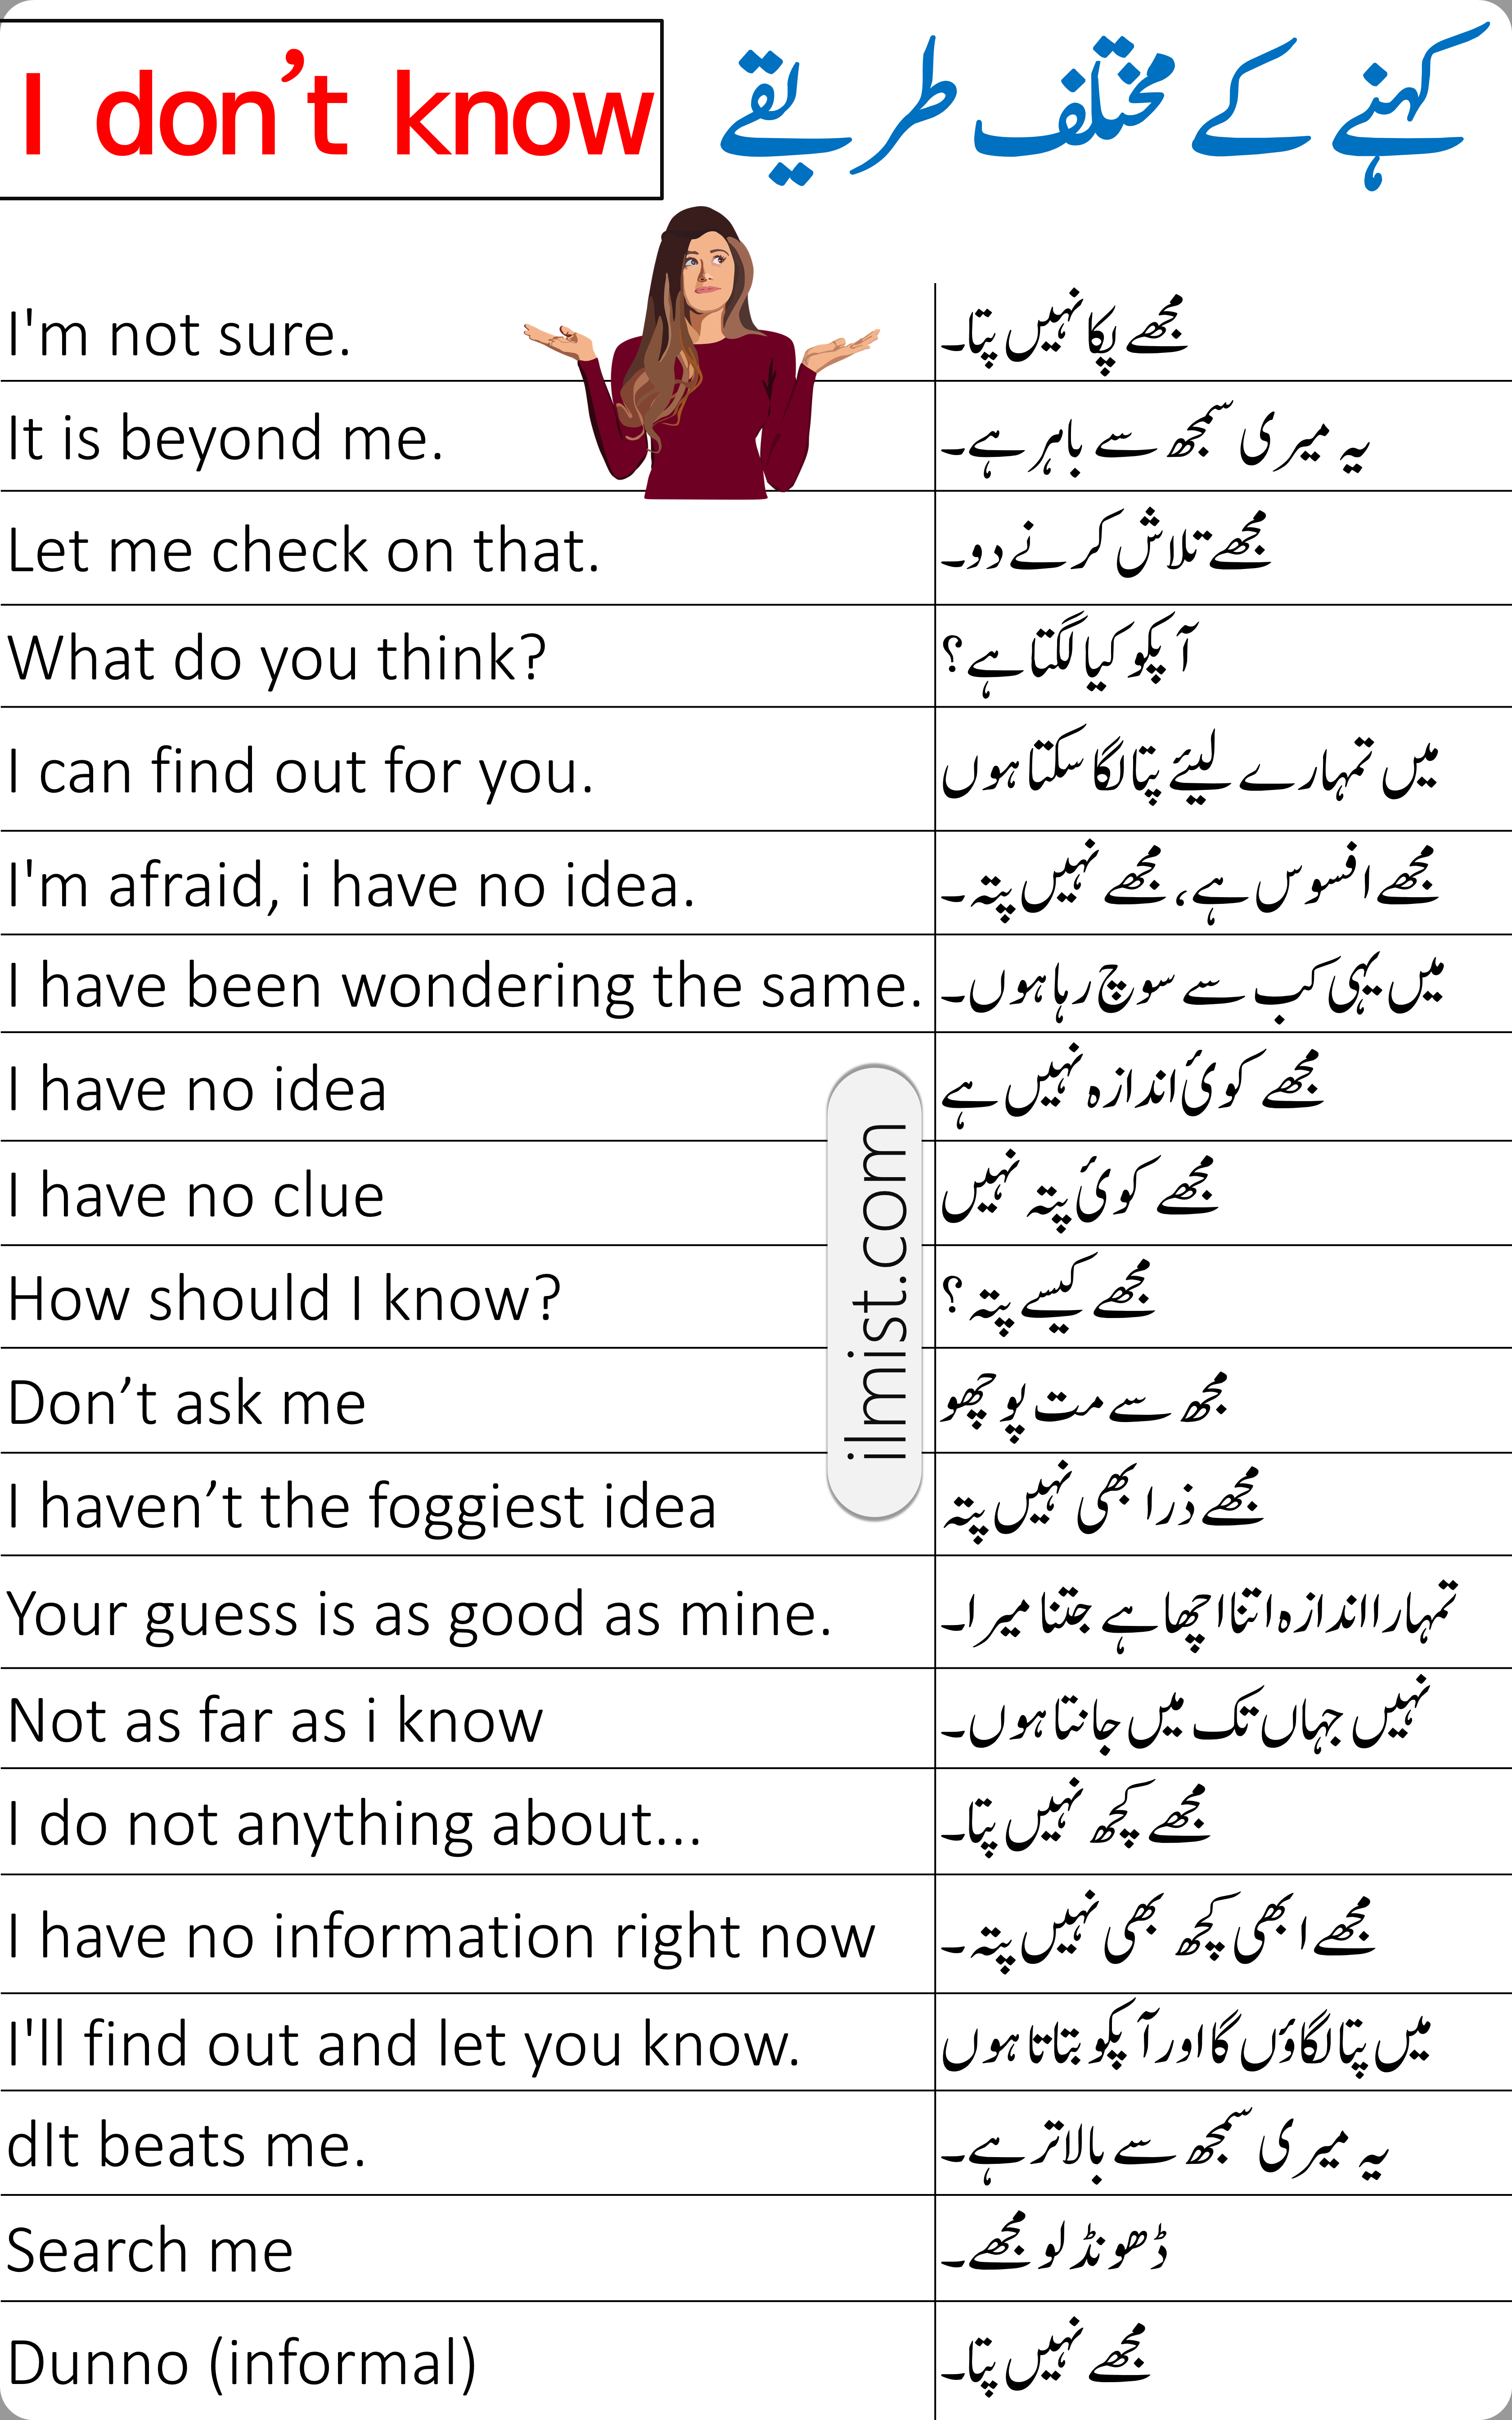 English Phrases for Saying I DON'T KNOW with Urdu Translation